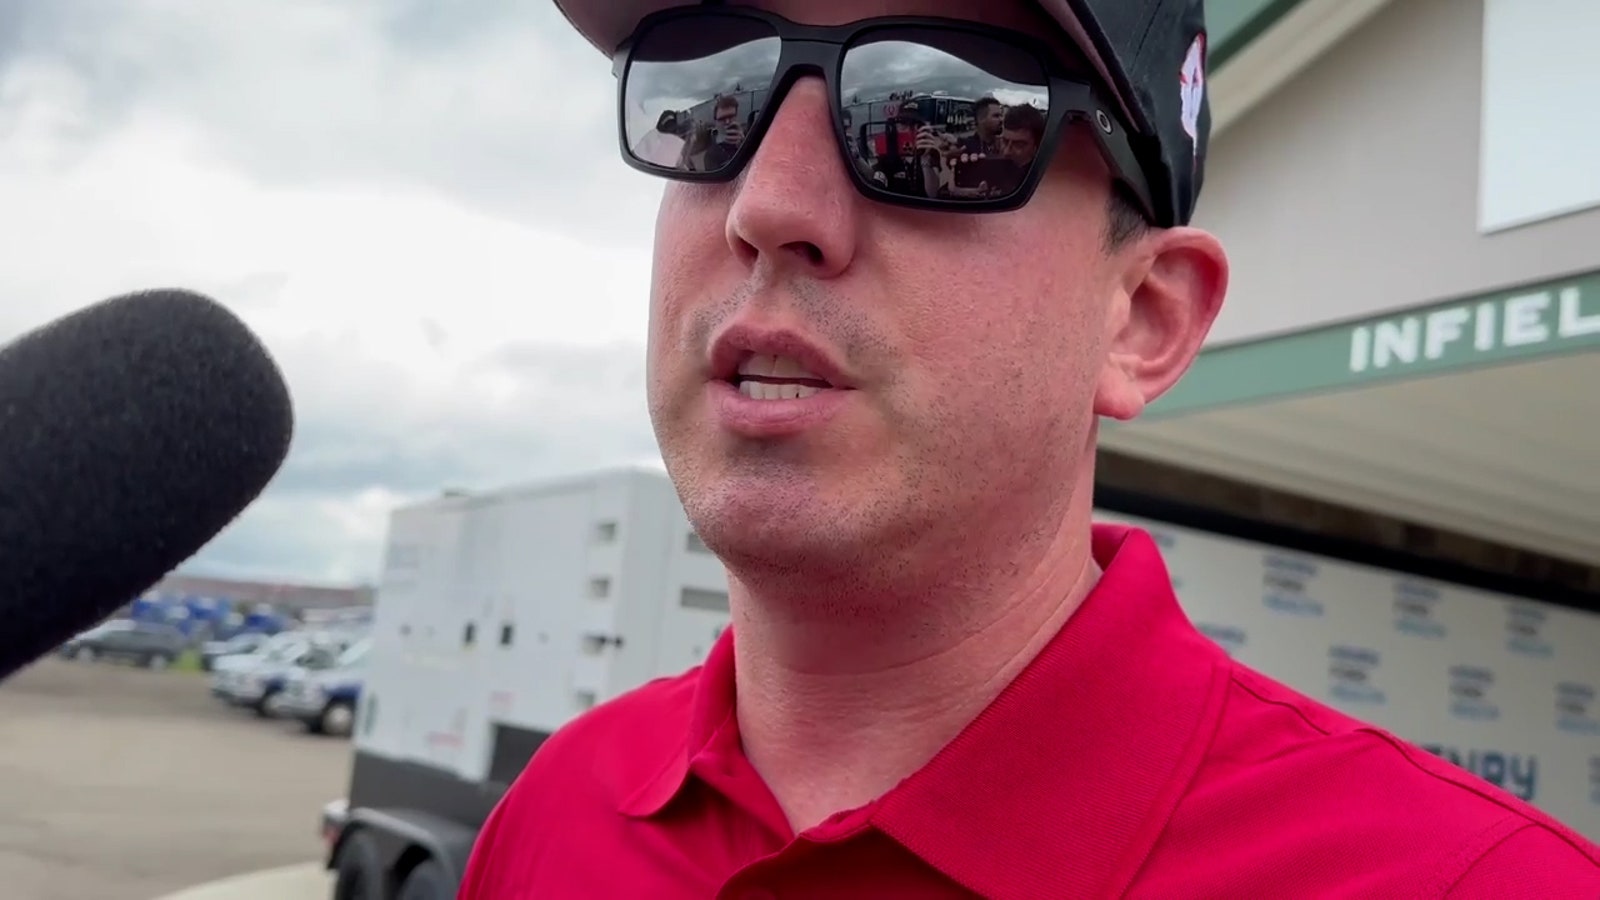 Kyle Busch says he put himself in a bad position that resulted in his wreck at Michigan